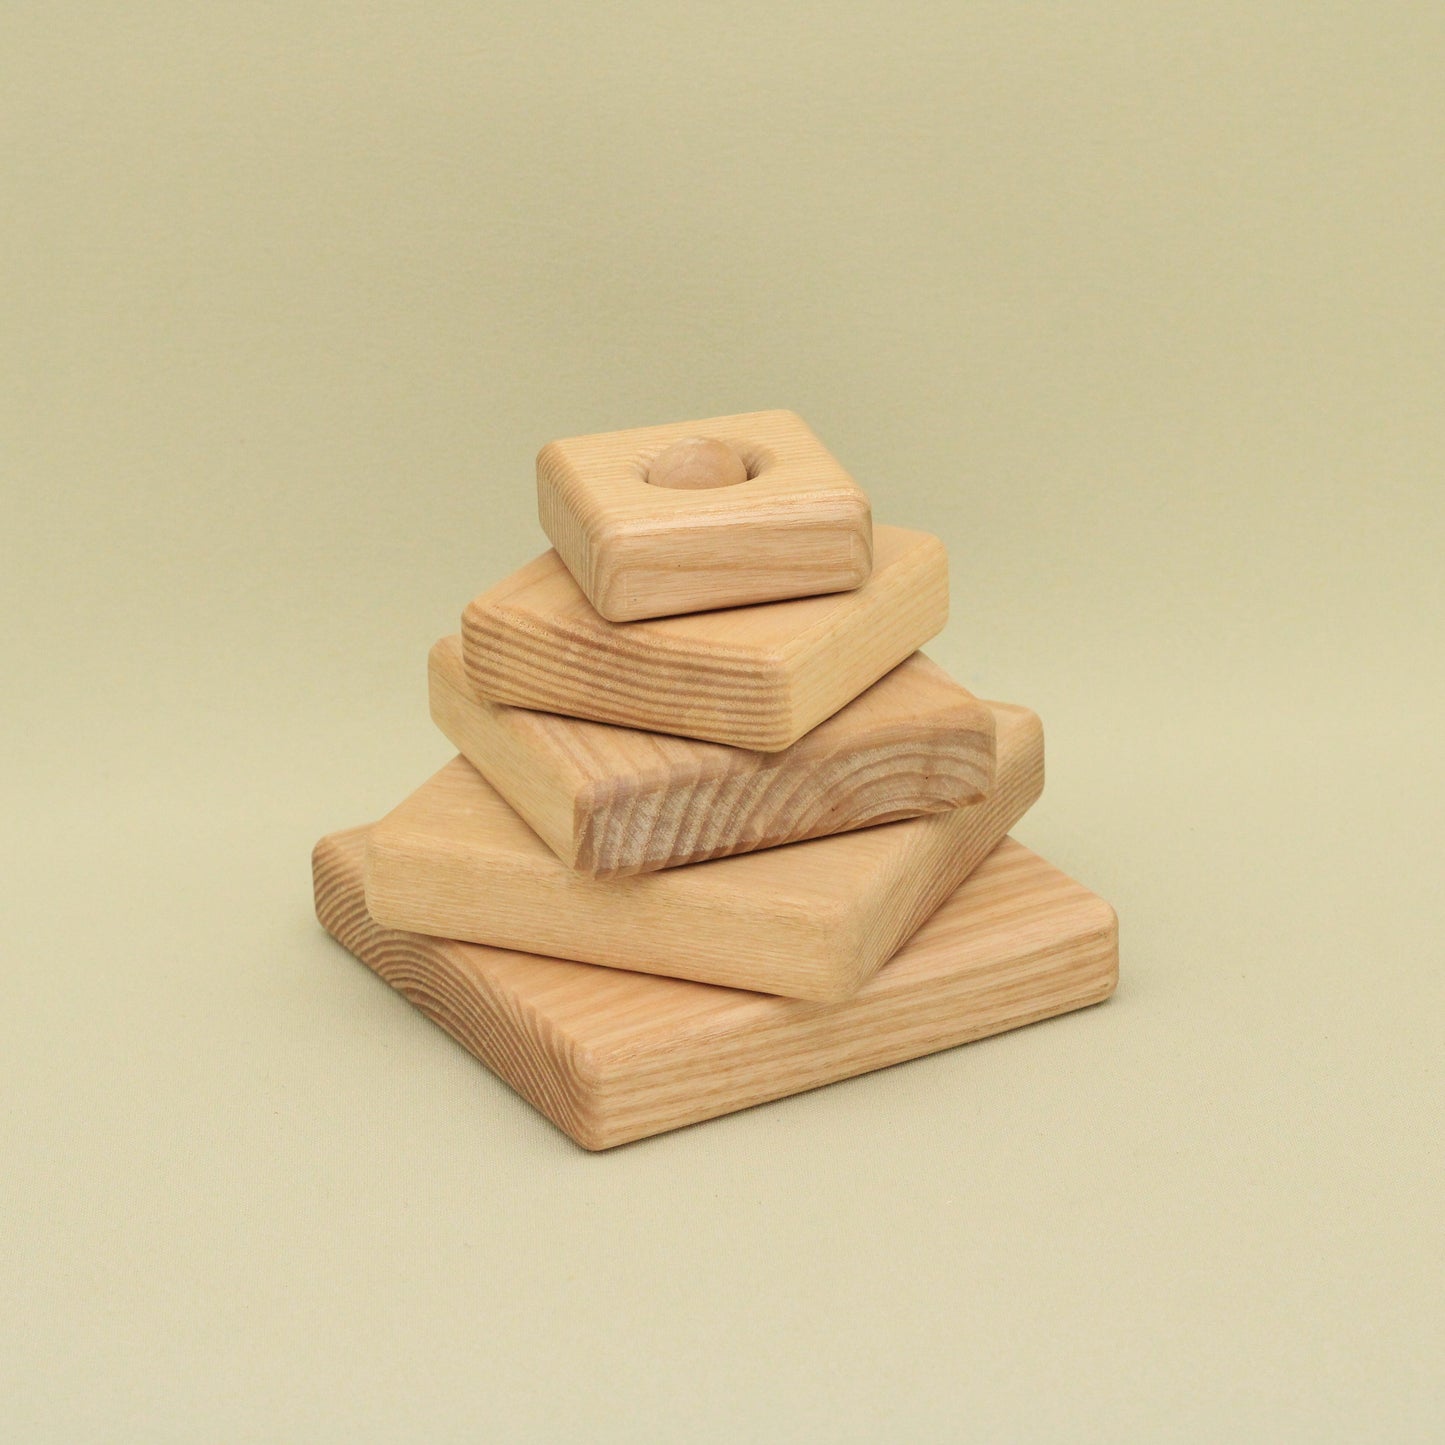 Lotes Toys Natural Square Wooden Stacking Pyramid PY21